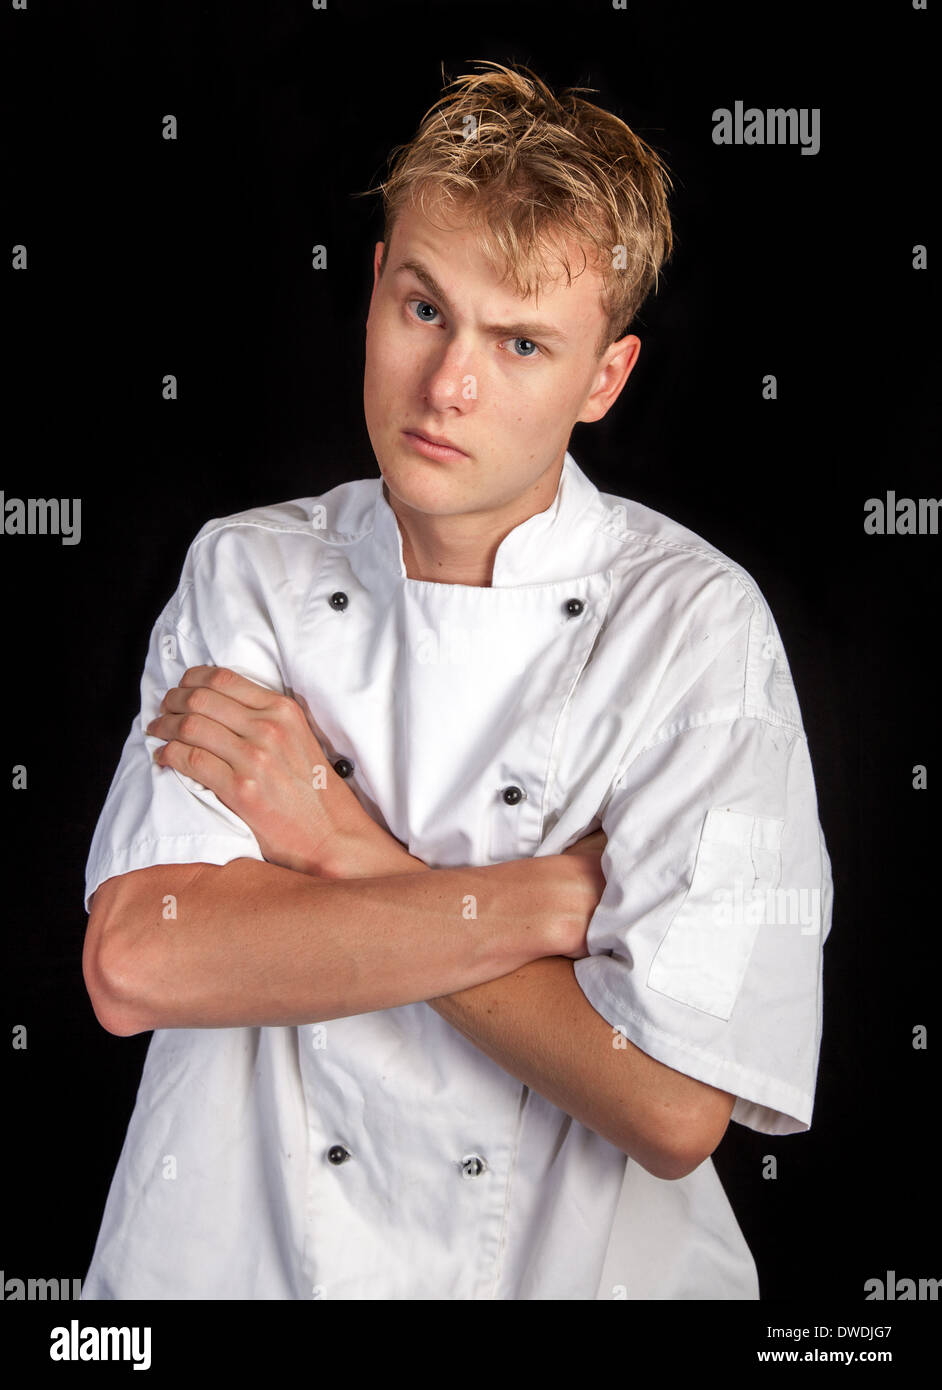 Young chef dealing with a bad day Stock Photo